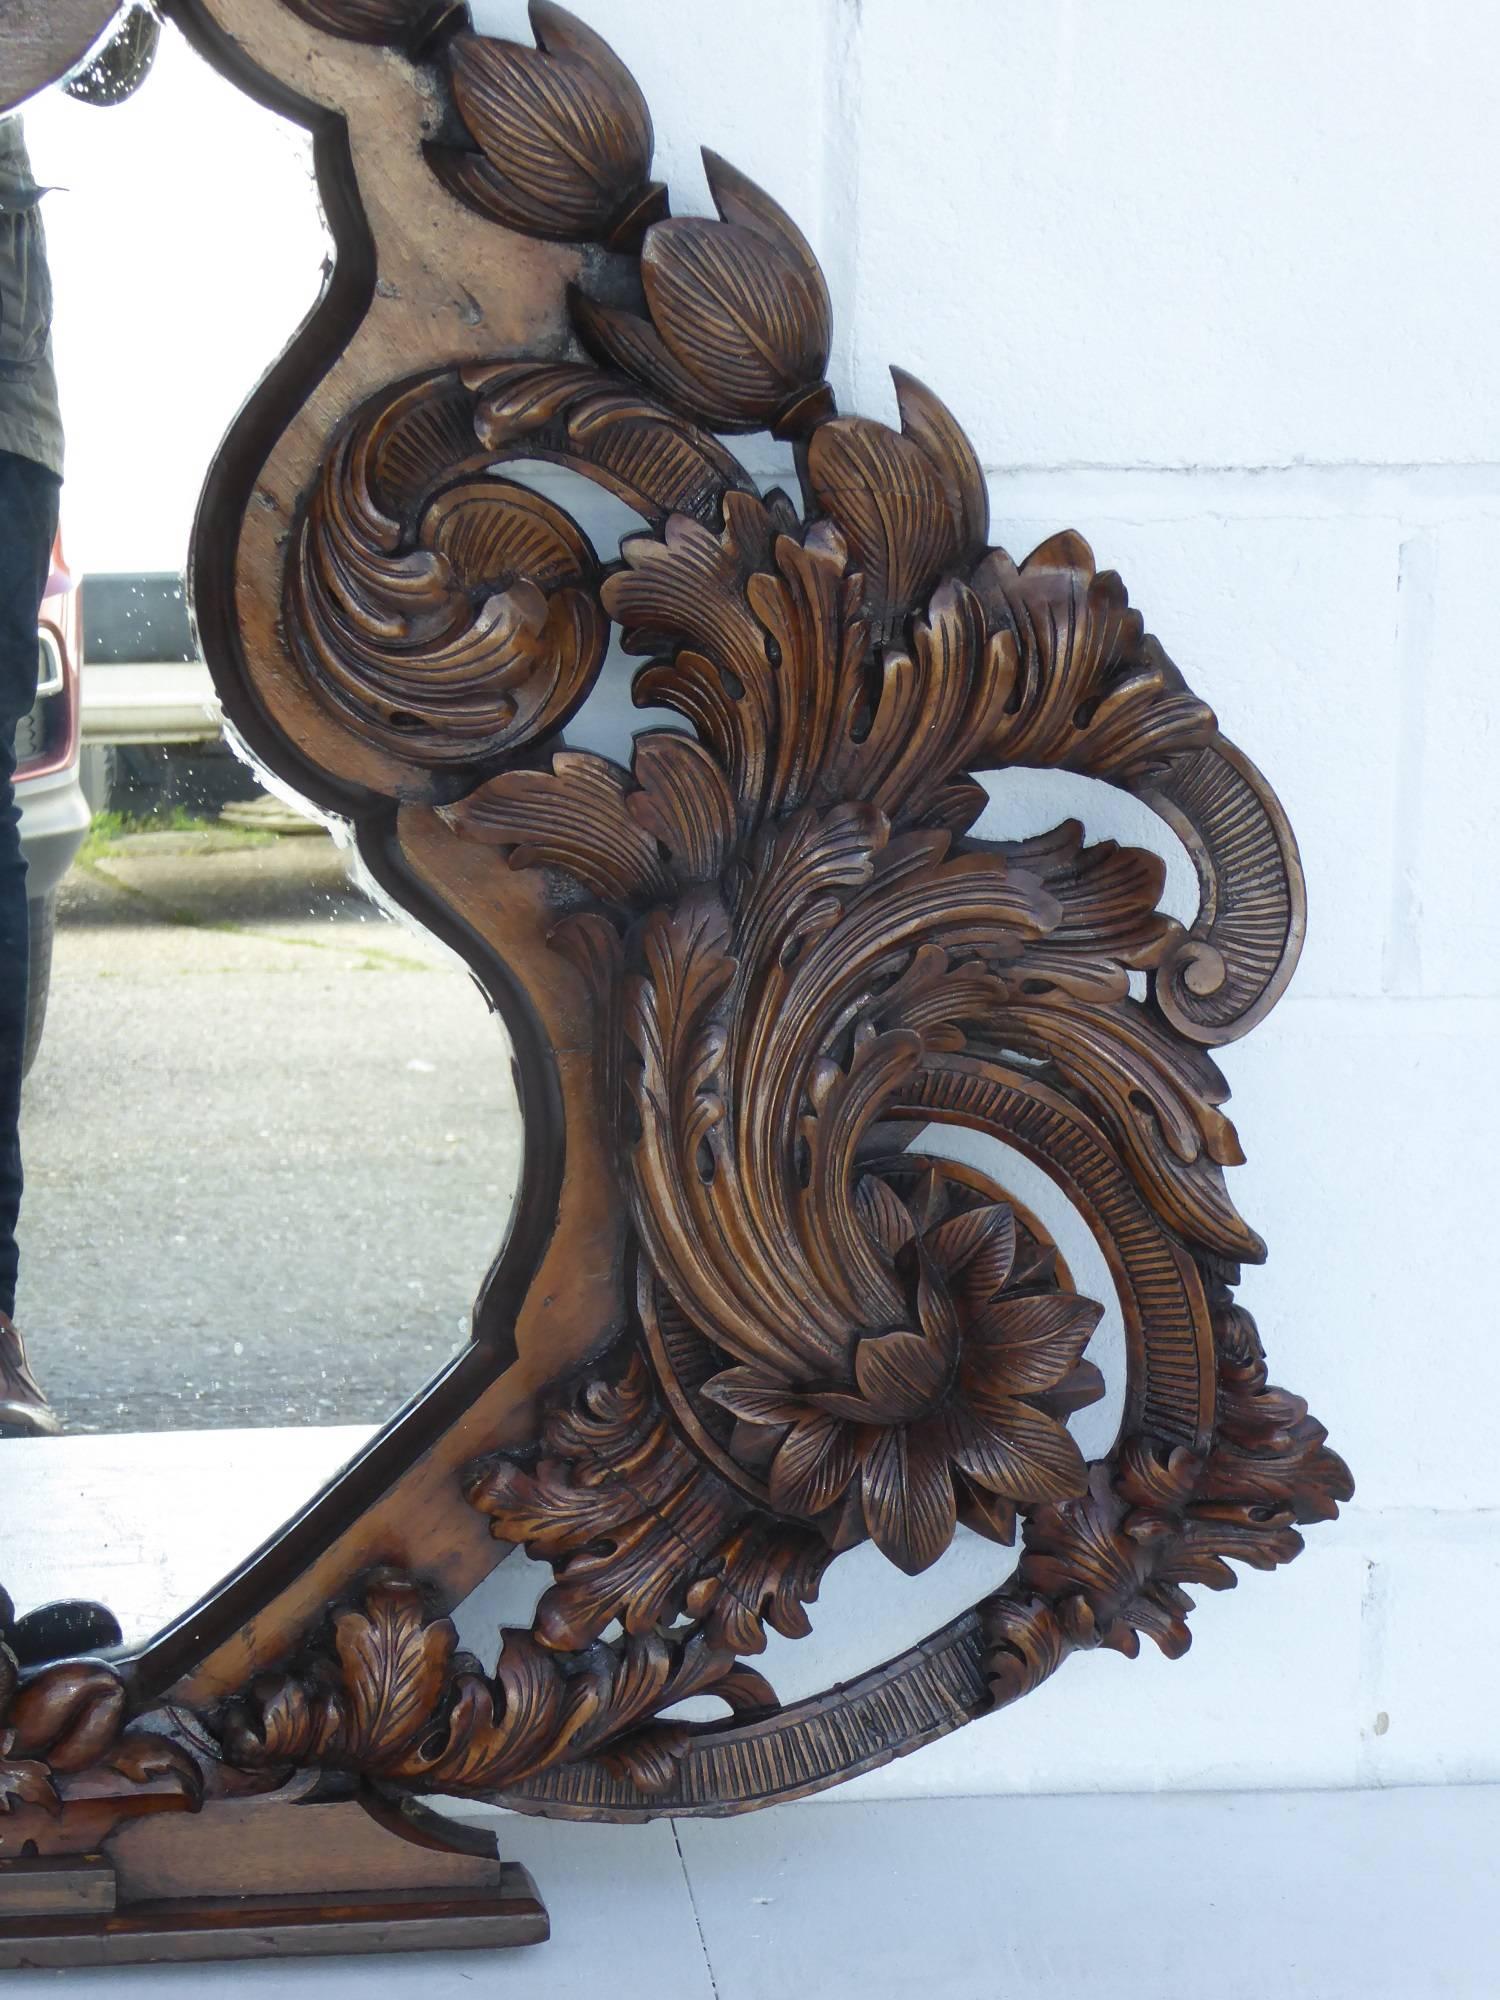 For sale is a good quality, 19th century heavily carved mirror. With a carved mask motif to the top, the mirror has incredibly ornate floral carvings on either side, surrounding a shaped mirror. The mirror is in good condition, and the frame is